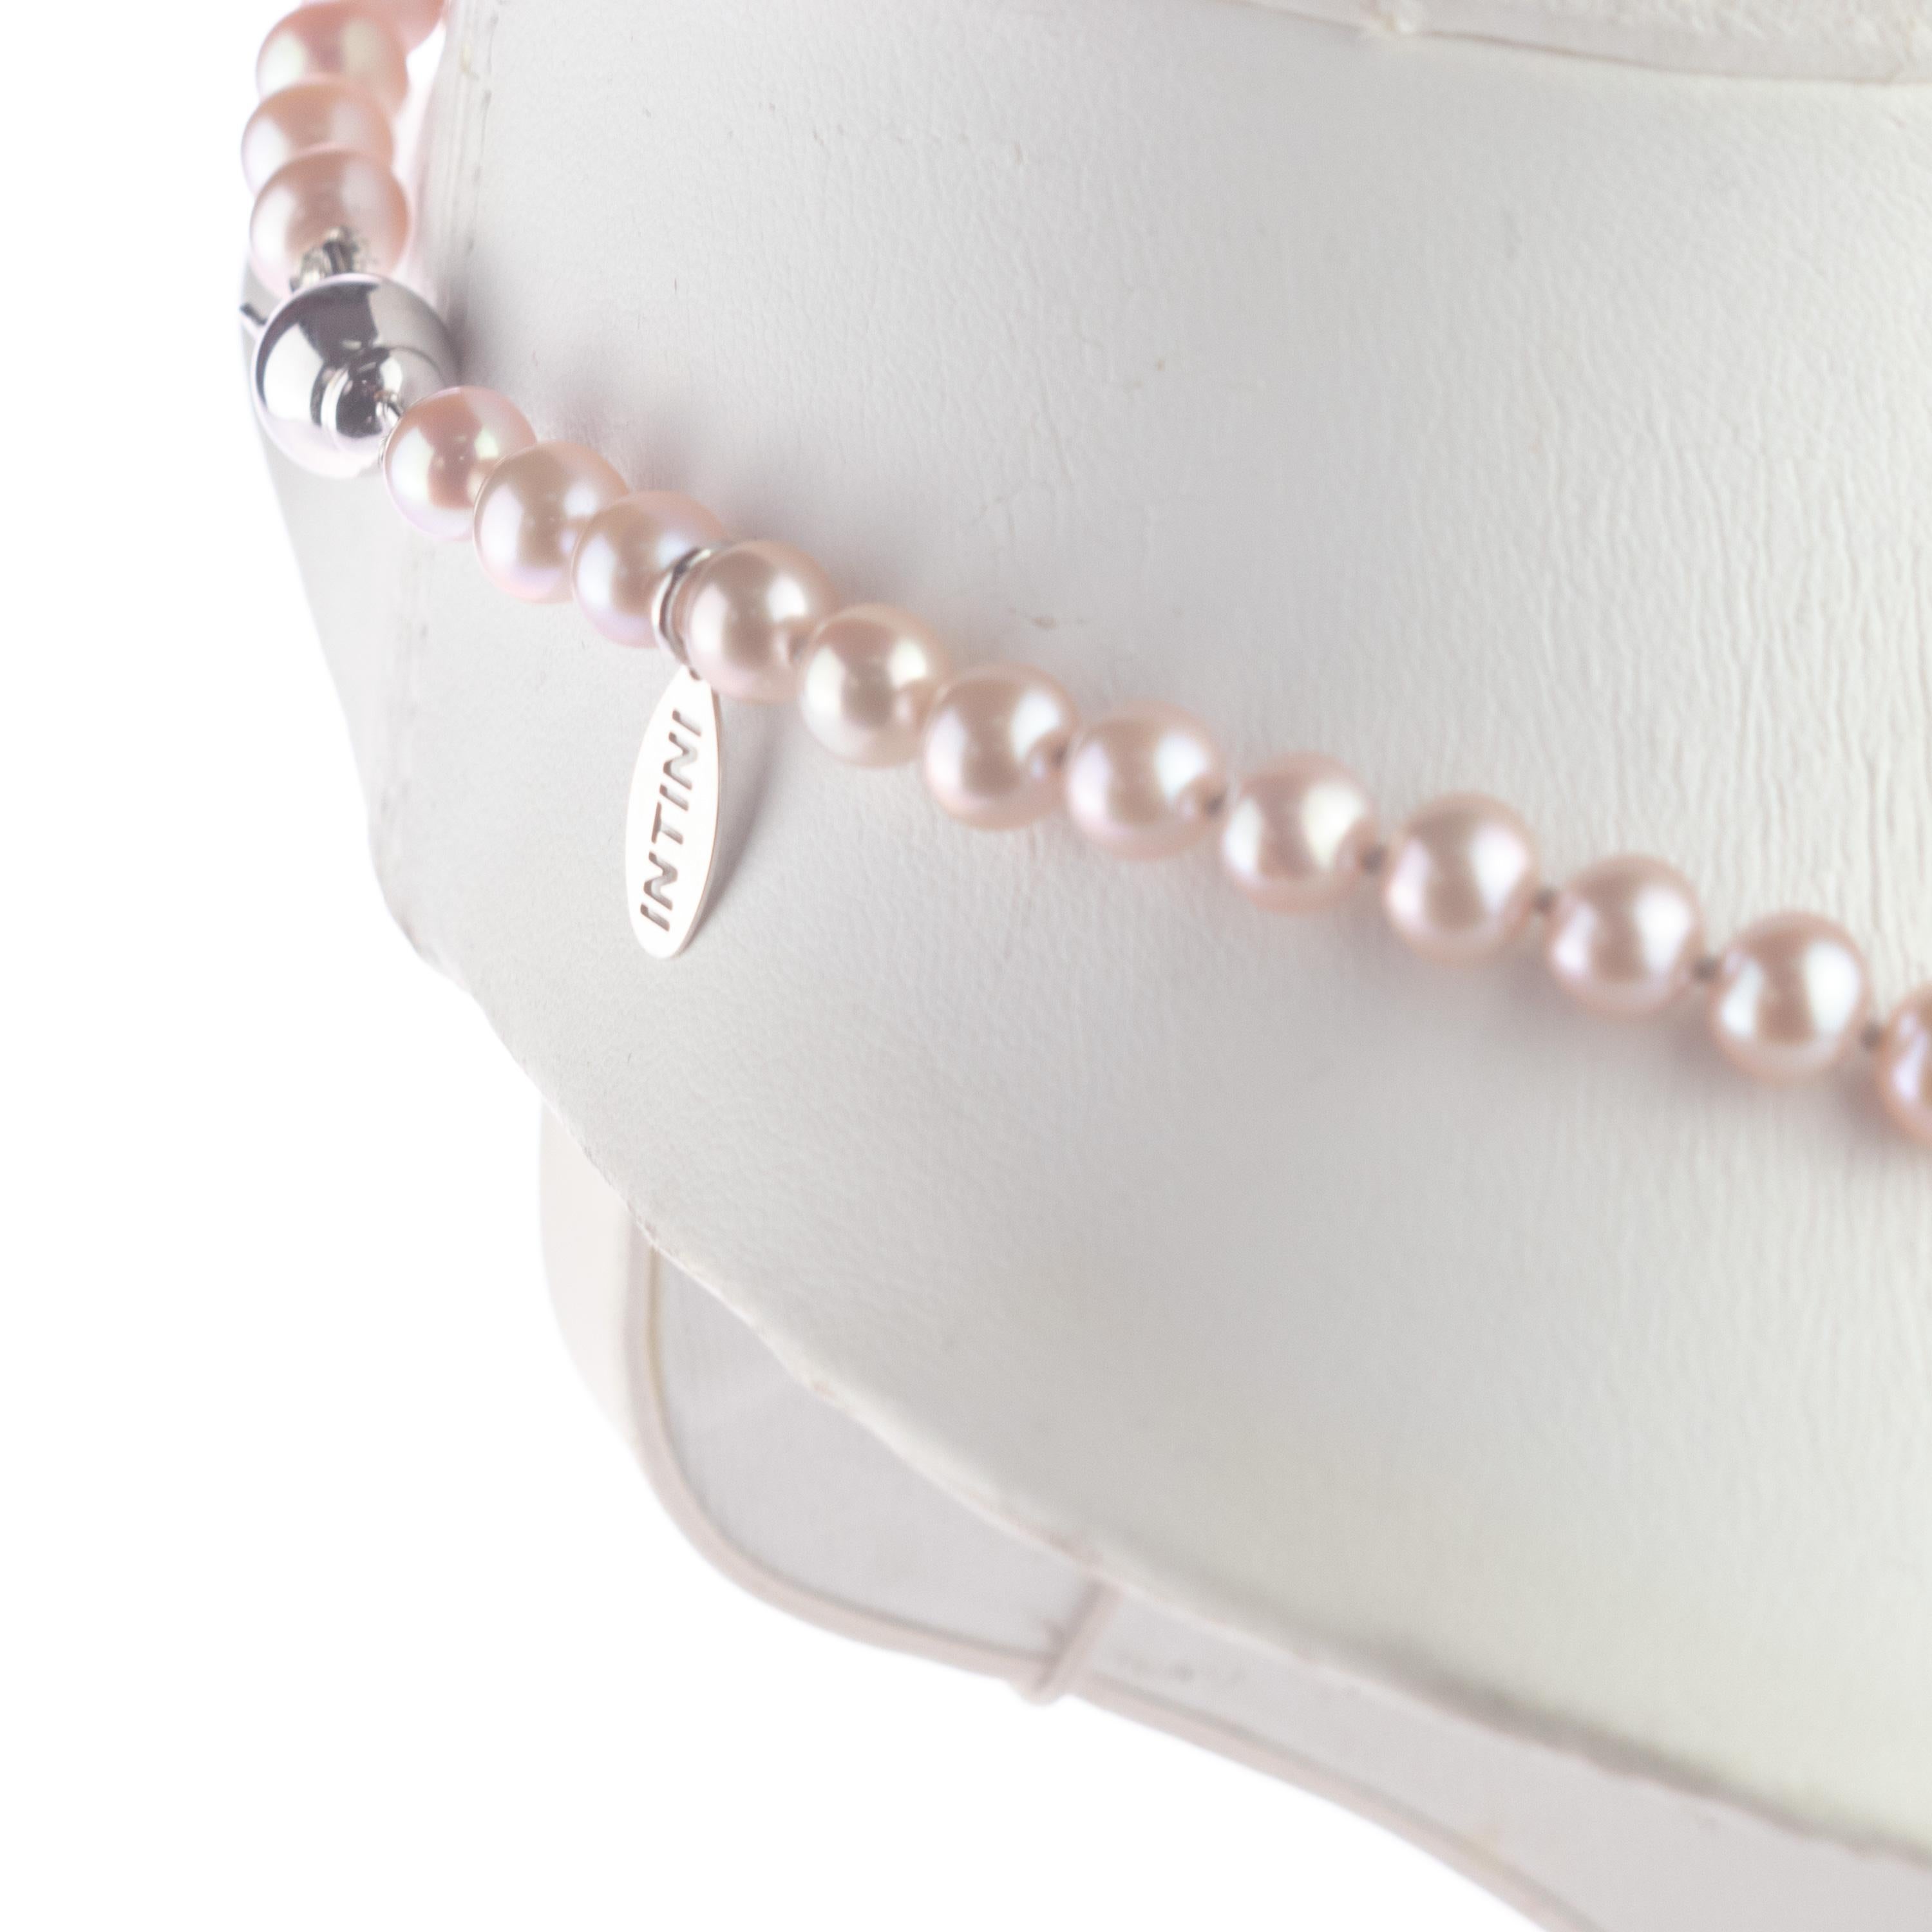 freshwater pearls meaning